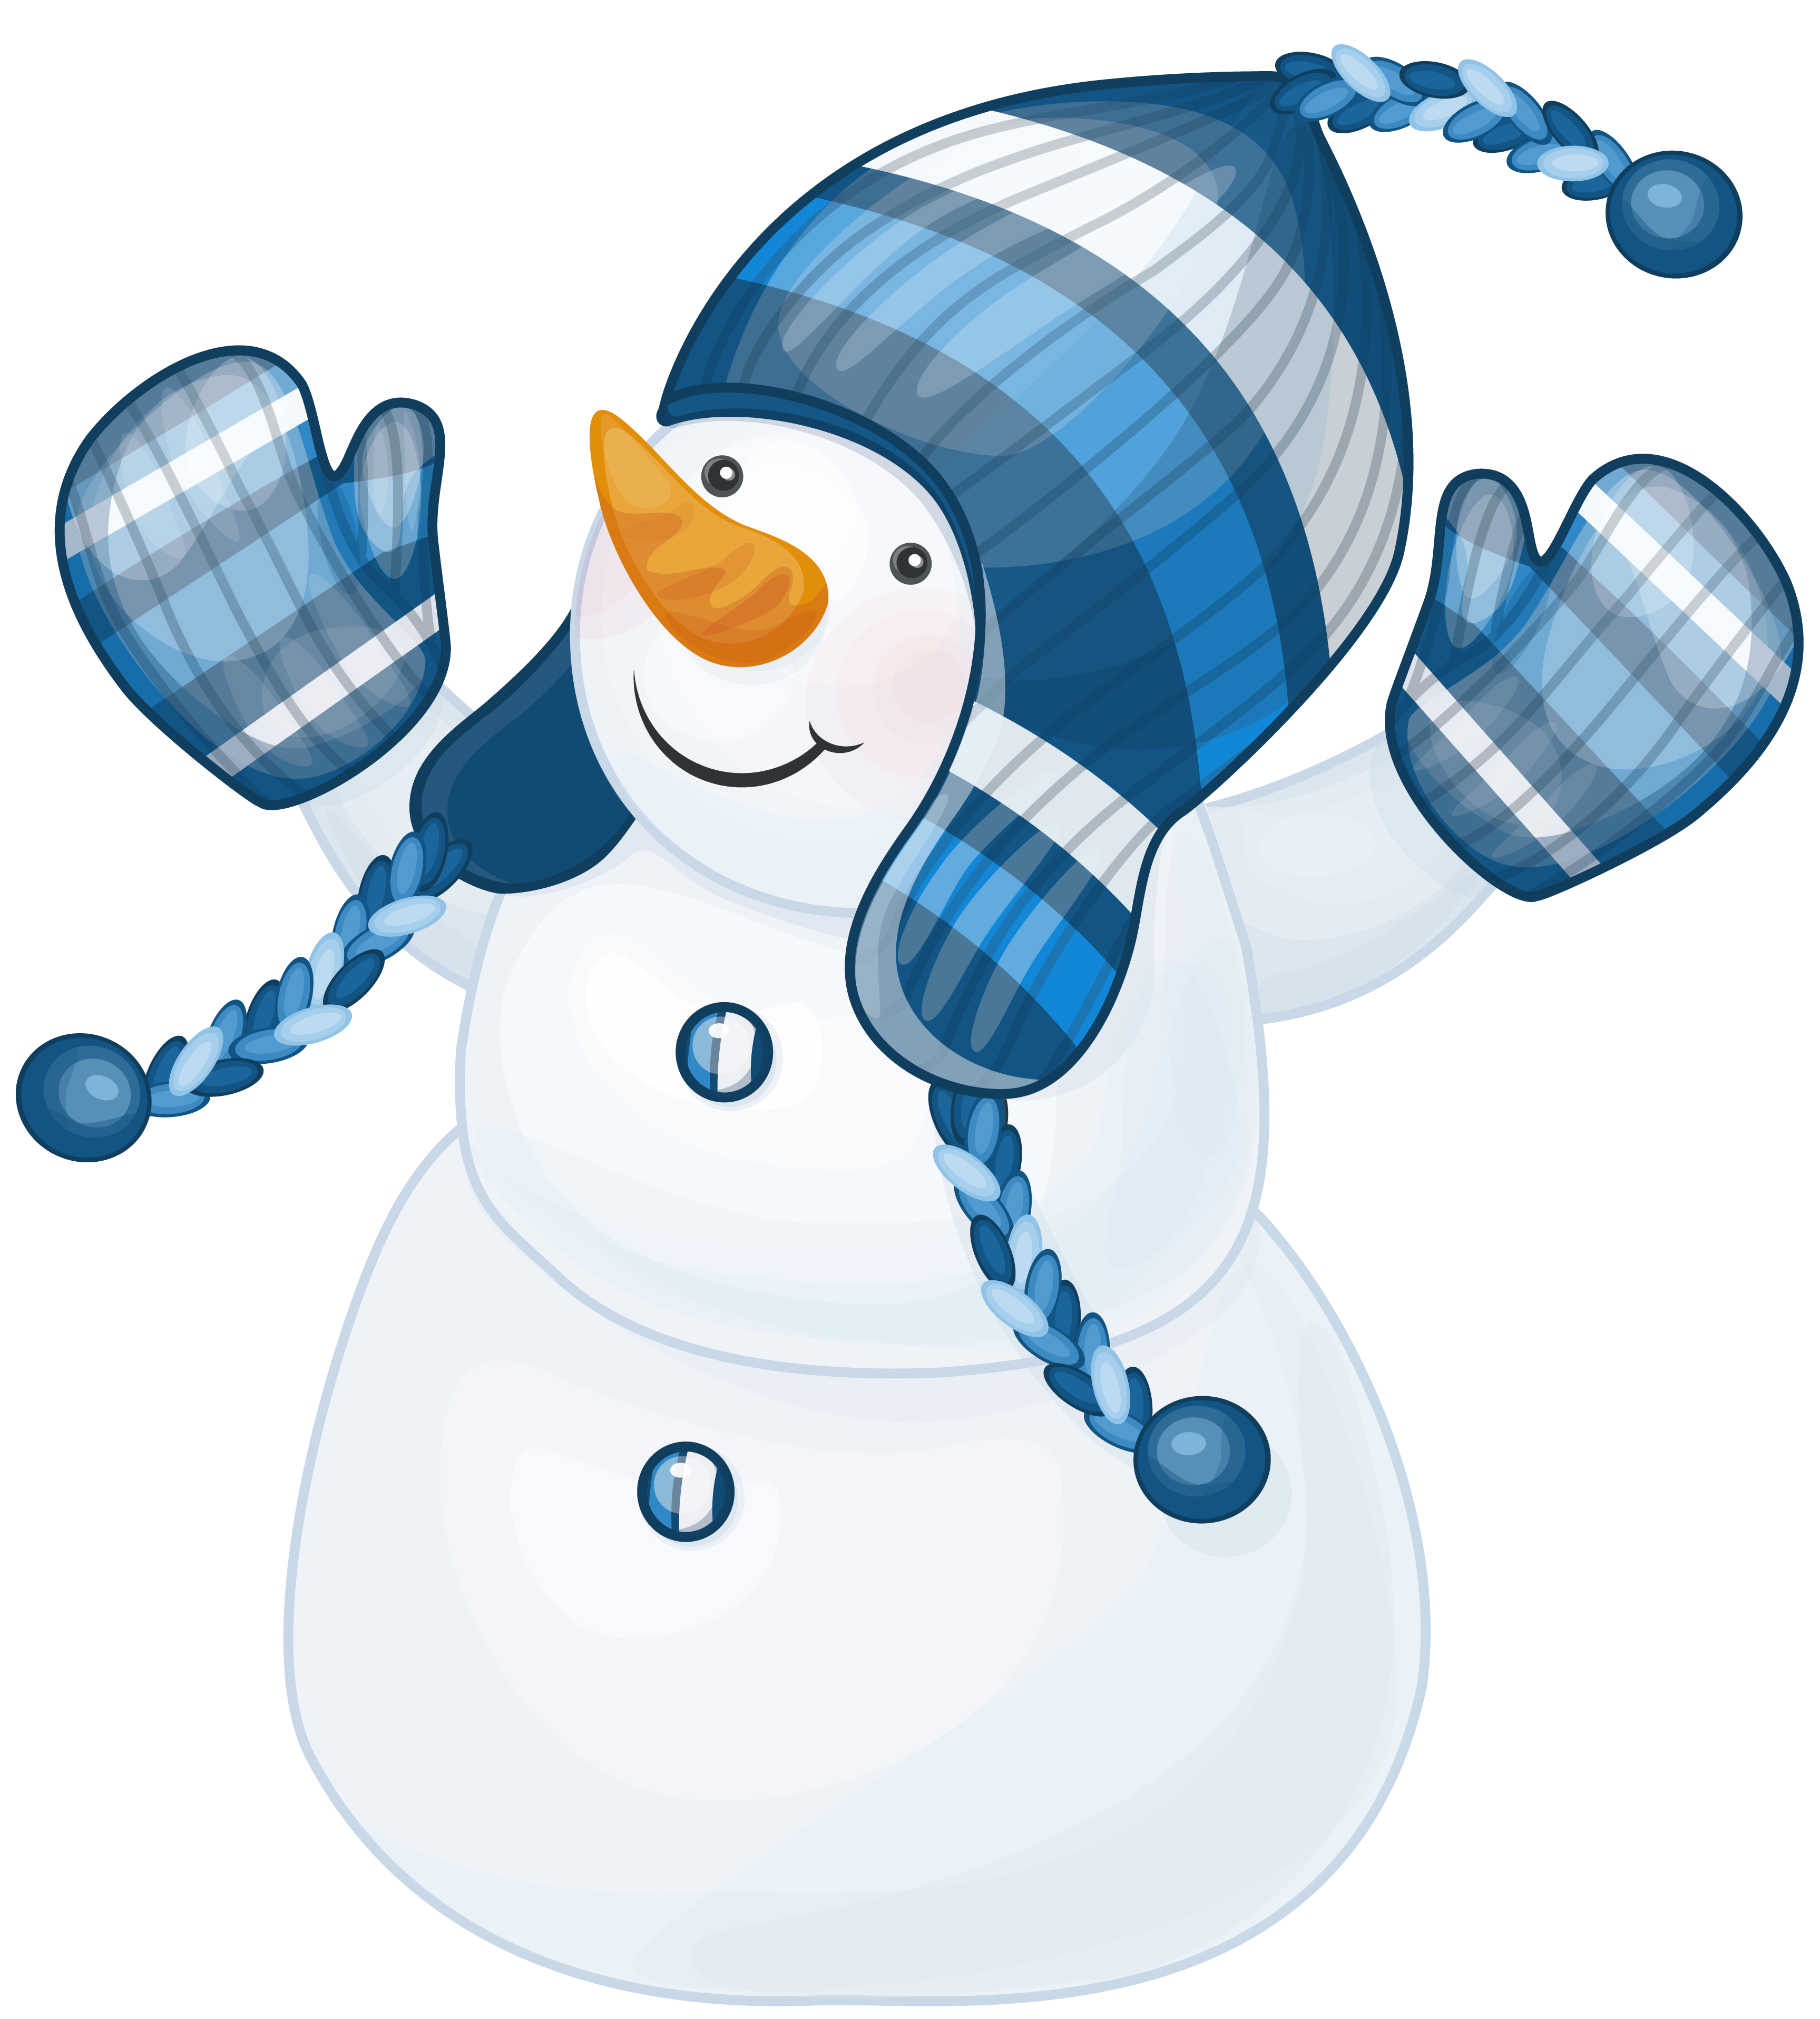 Clipart map rustic. Snowman with blue hat